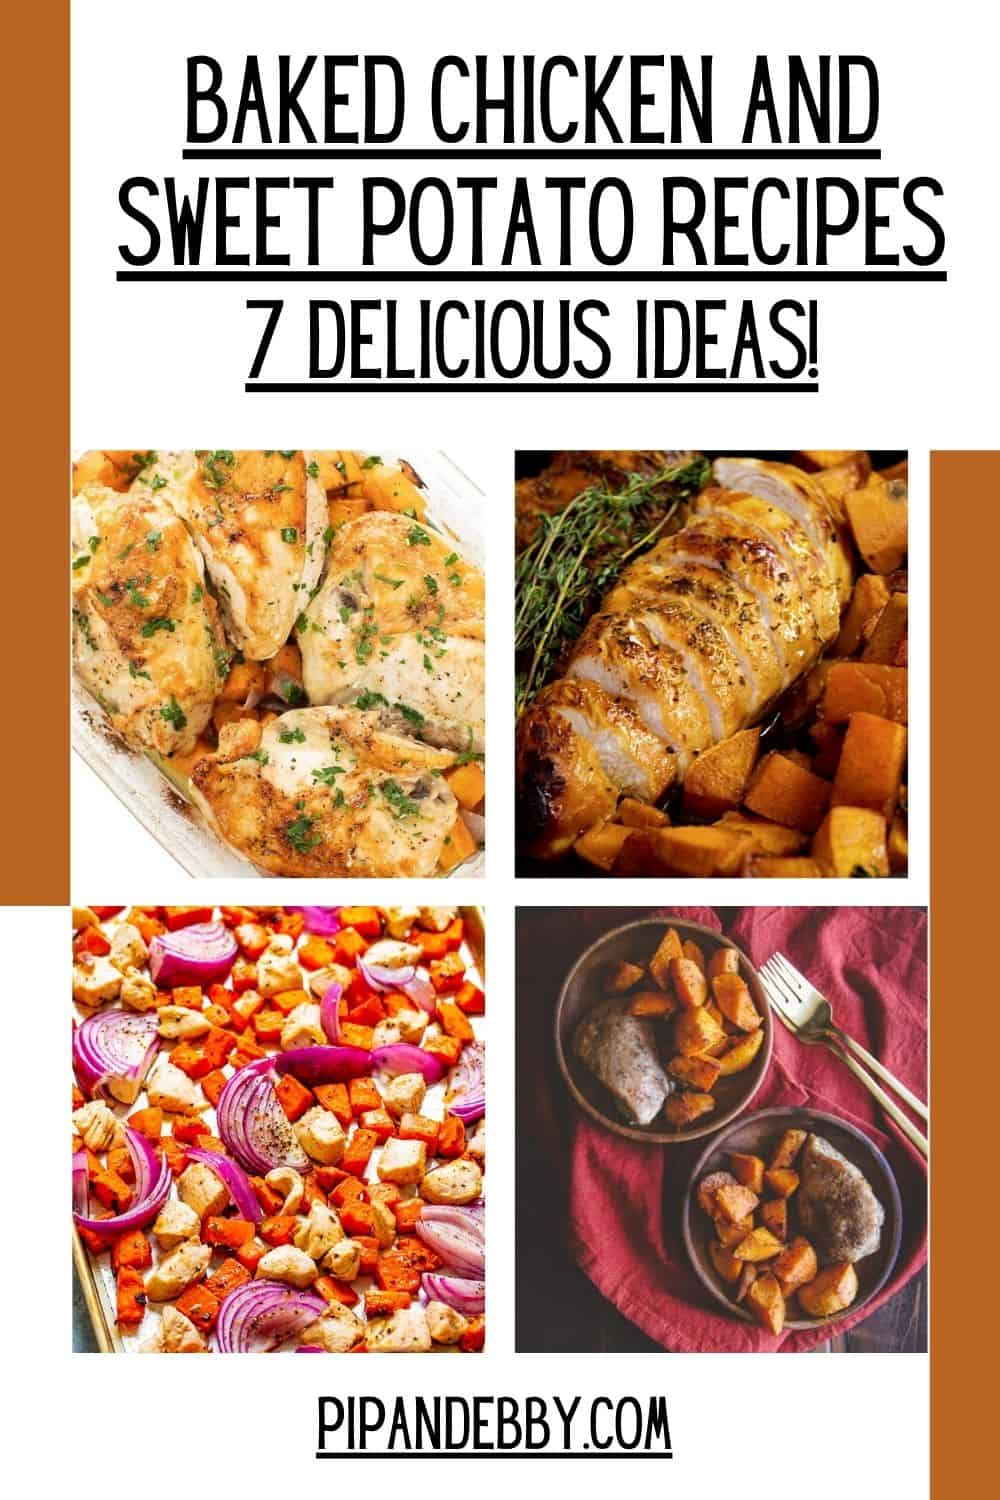 Pinterest graphic with 4 photos and copy reading: "Baked Chicken and Sweet Potatoes Recipes - 7 Delicious Ideas!"